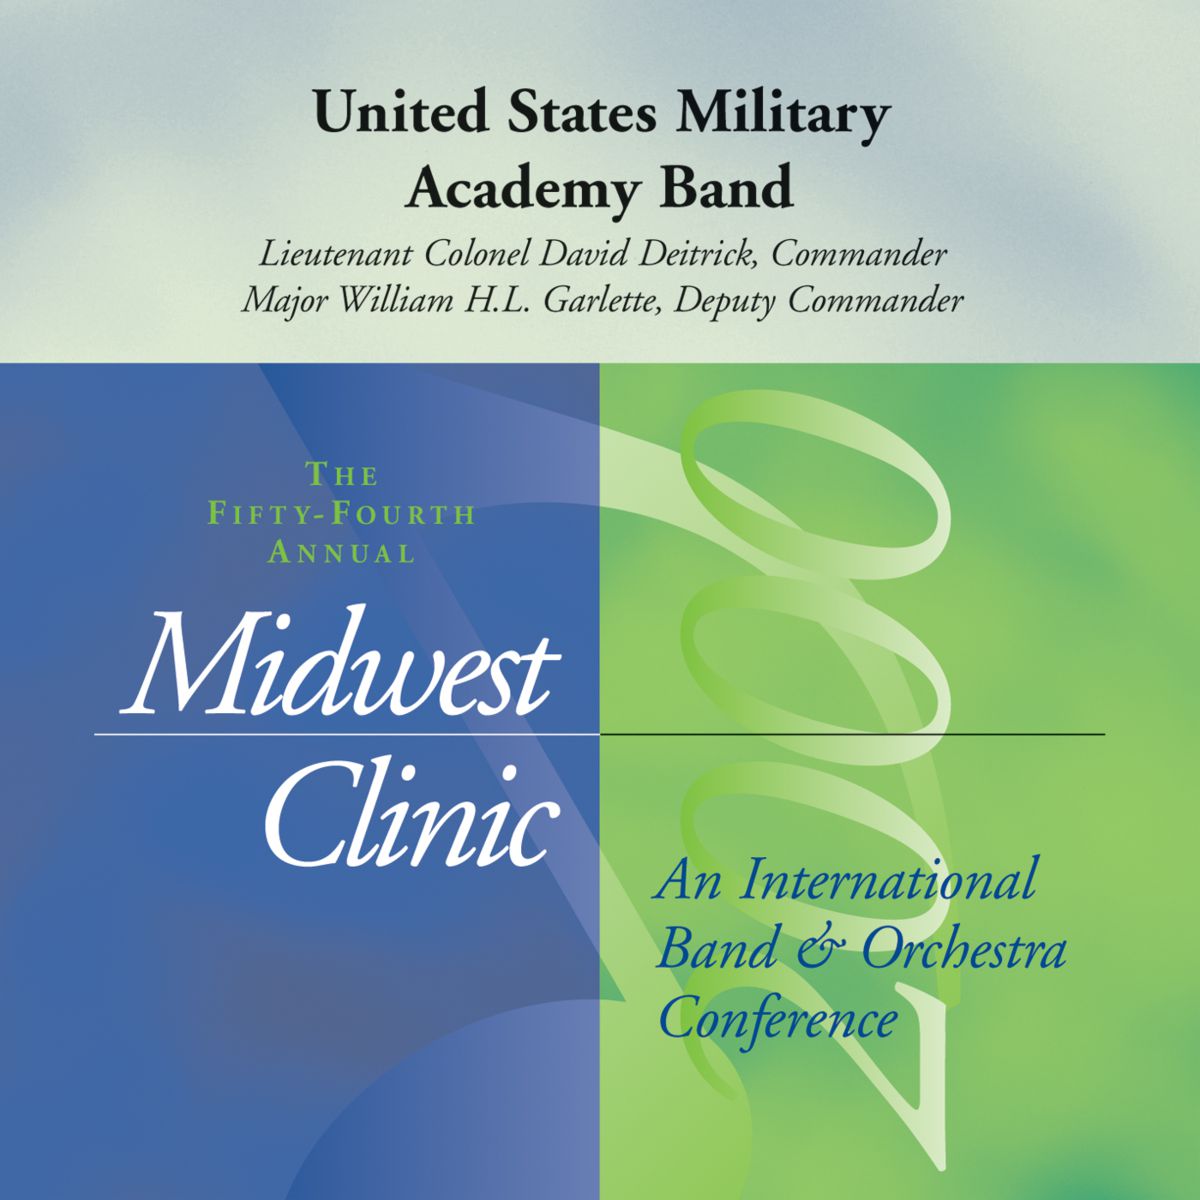 2000 Midwest Clinic: United States Military Academy Band - cliquer ici